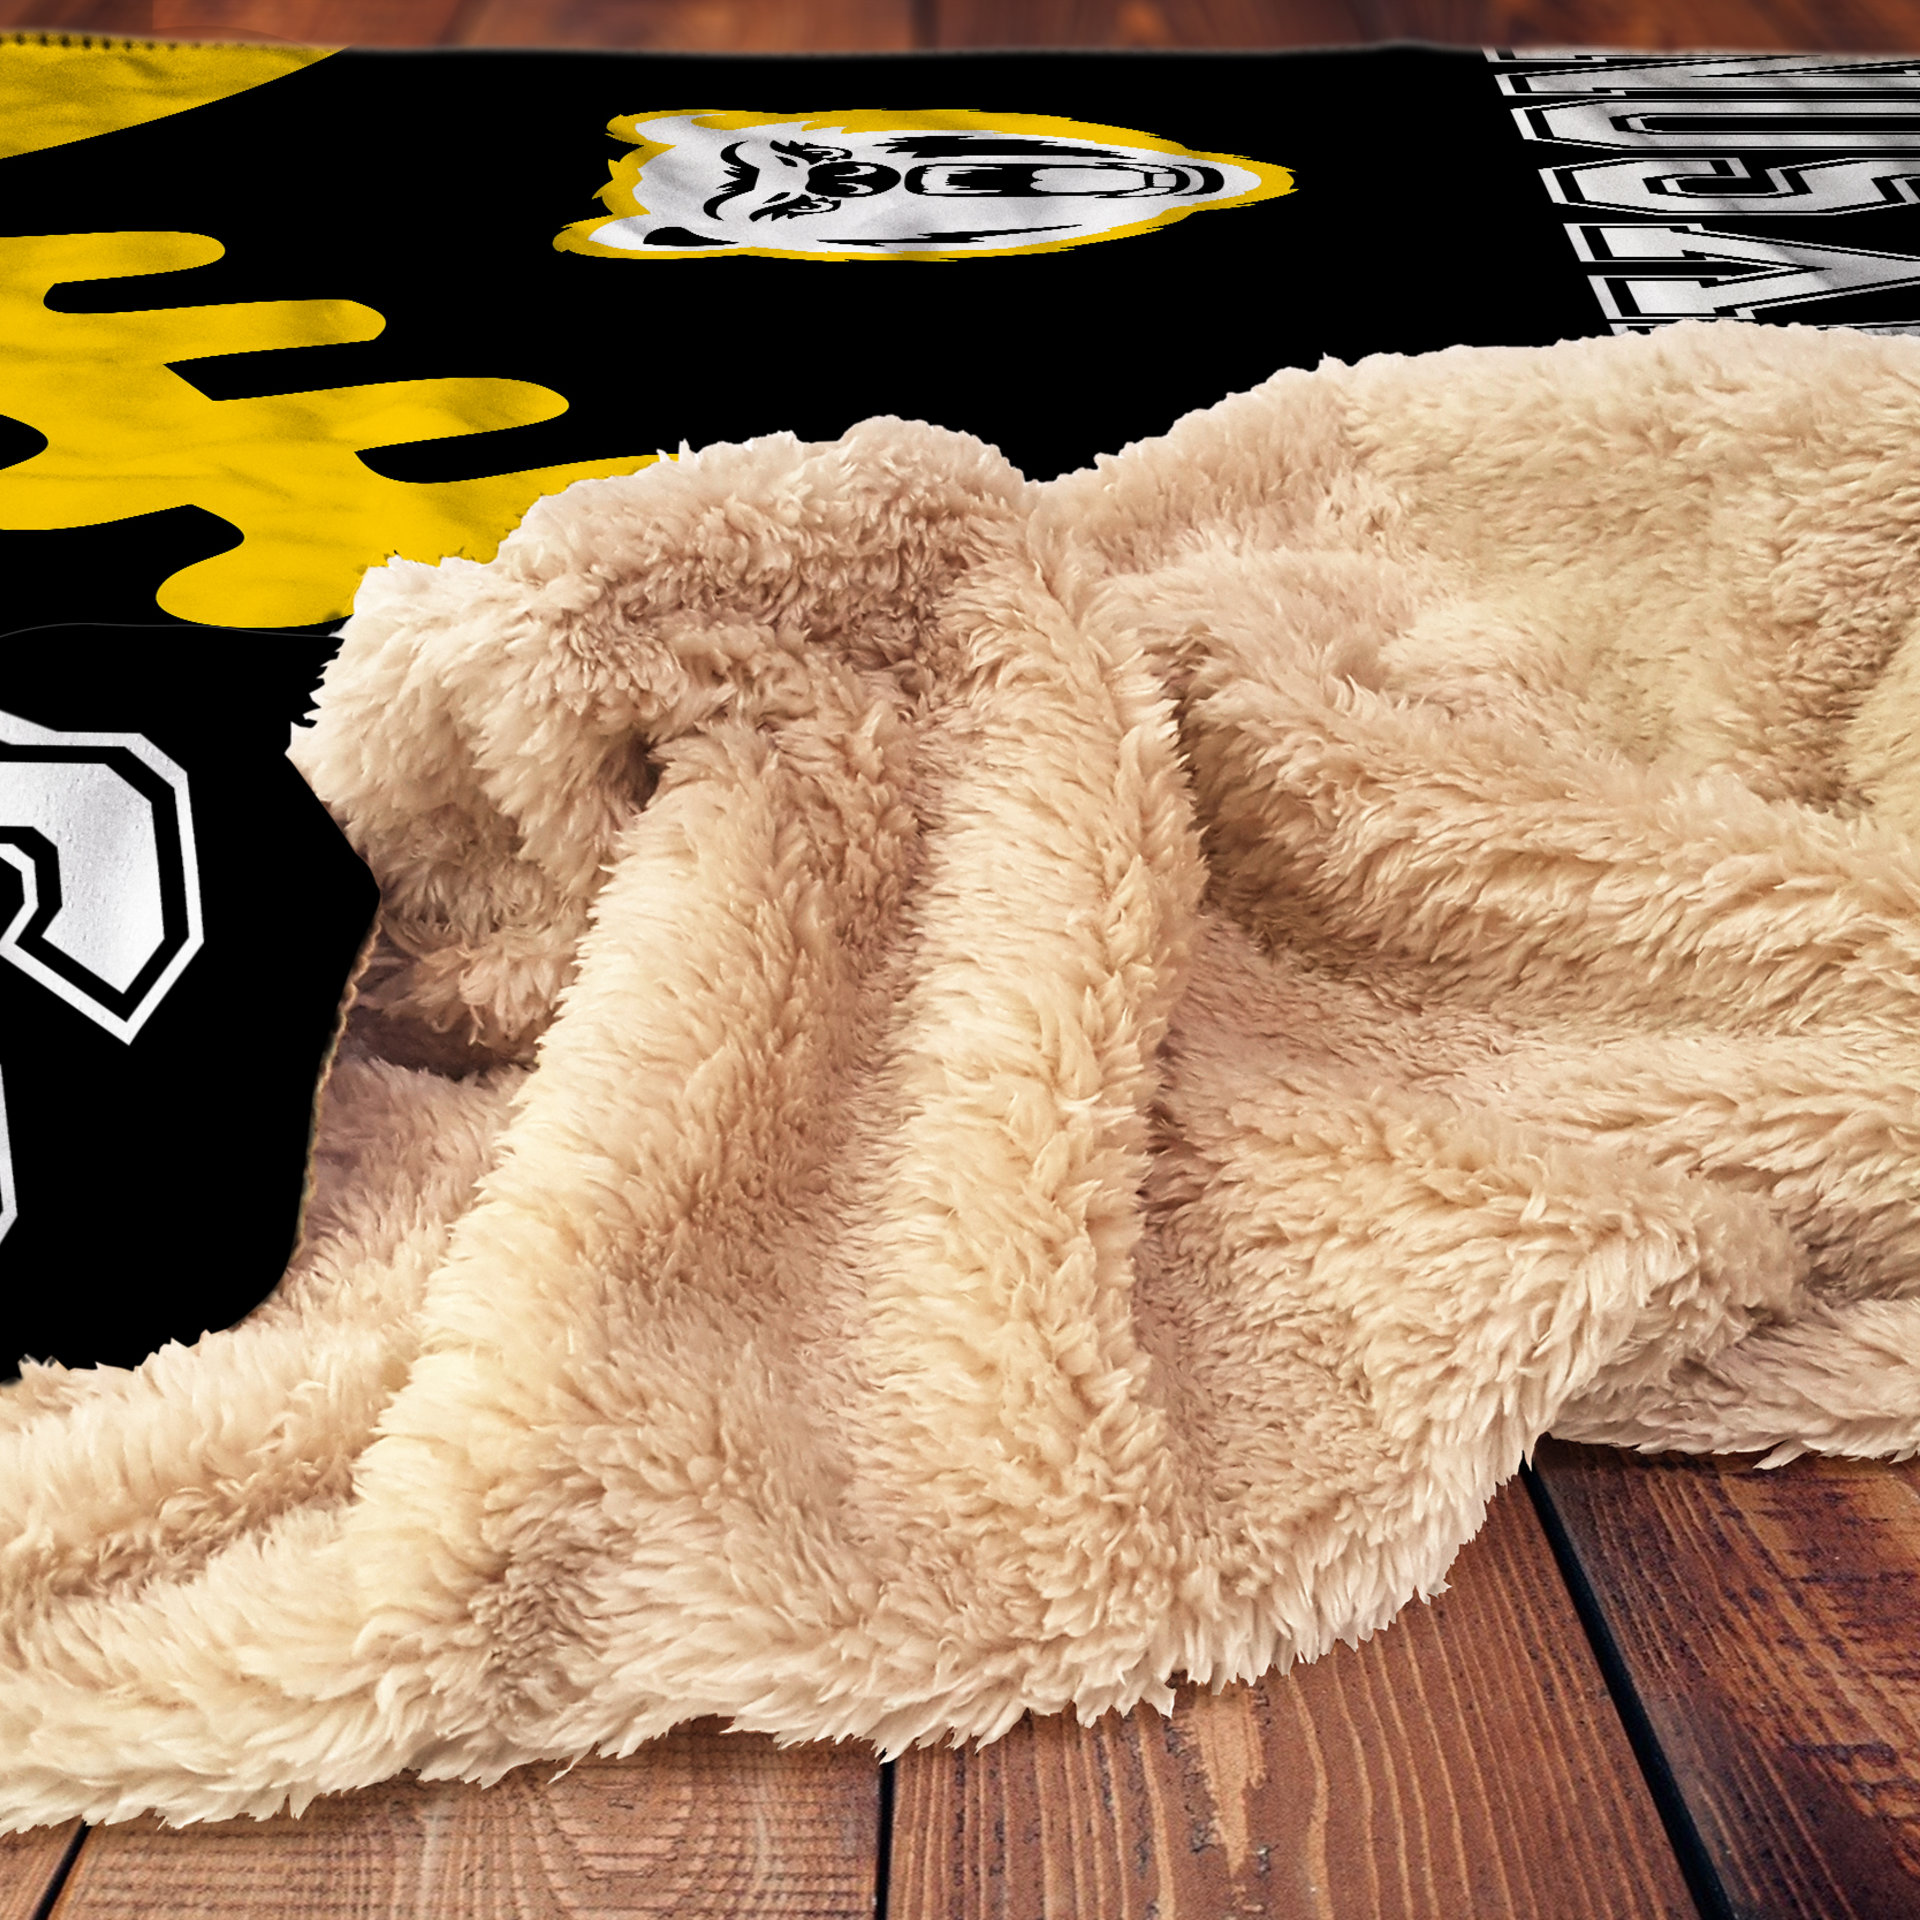 Personalized Football Hooded Sherpa Blanket